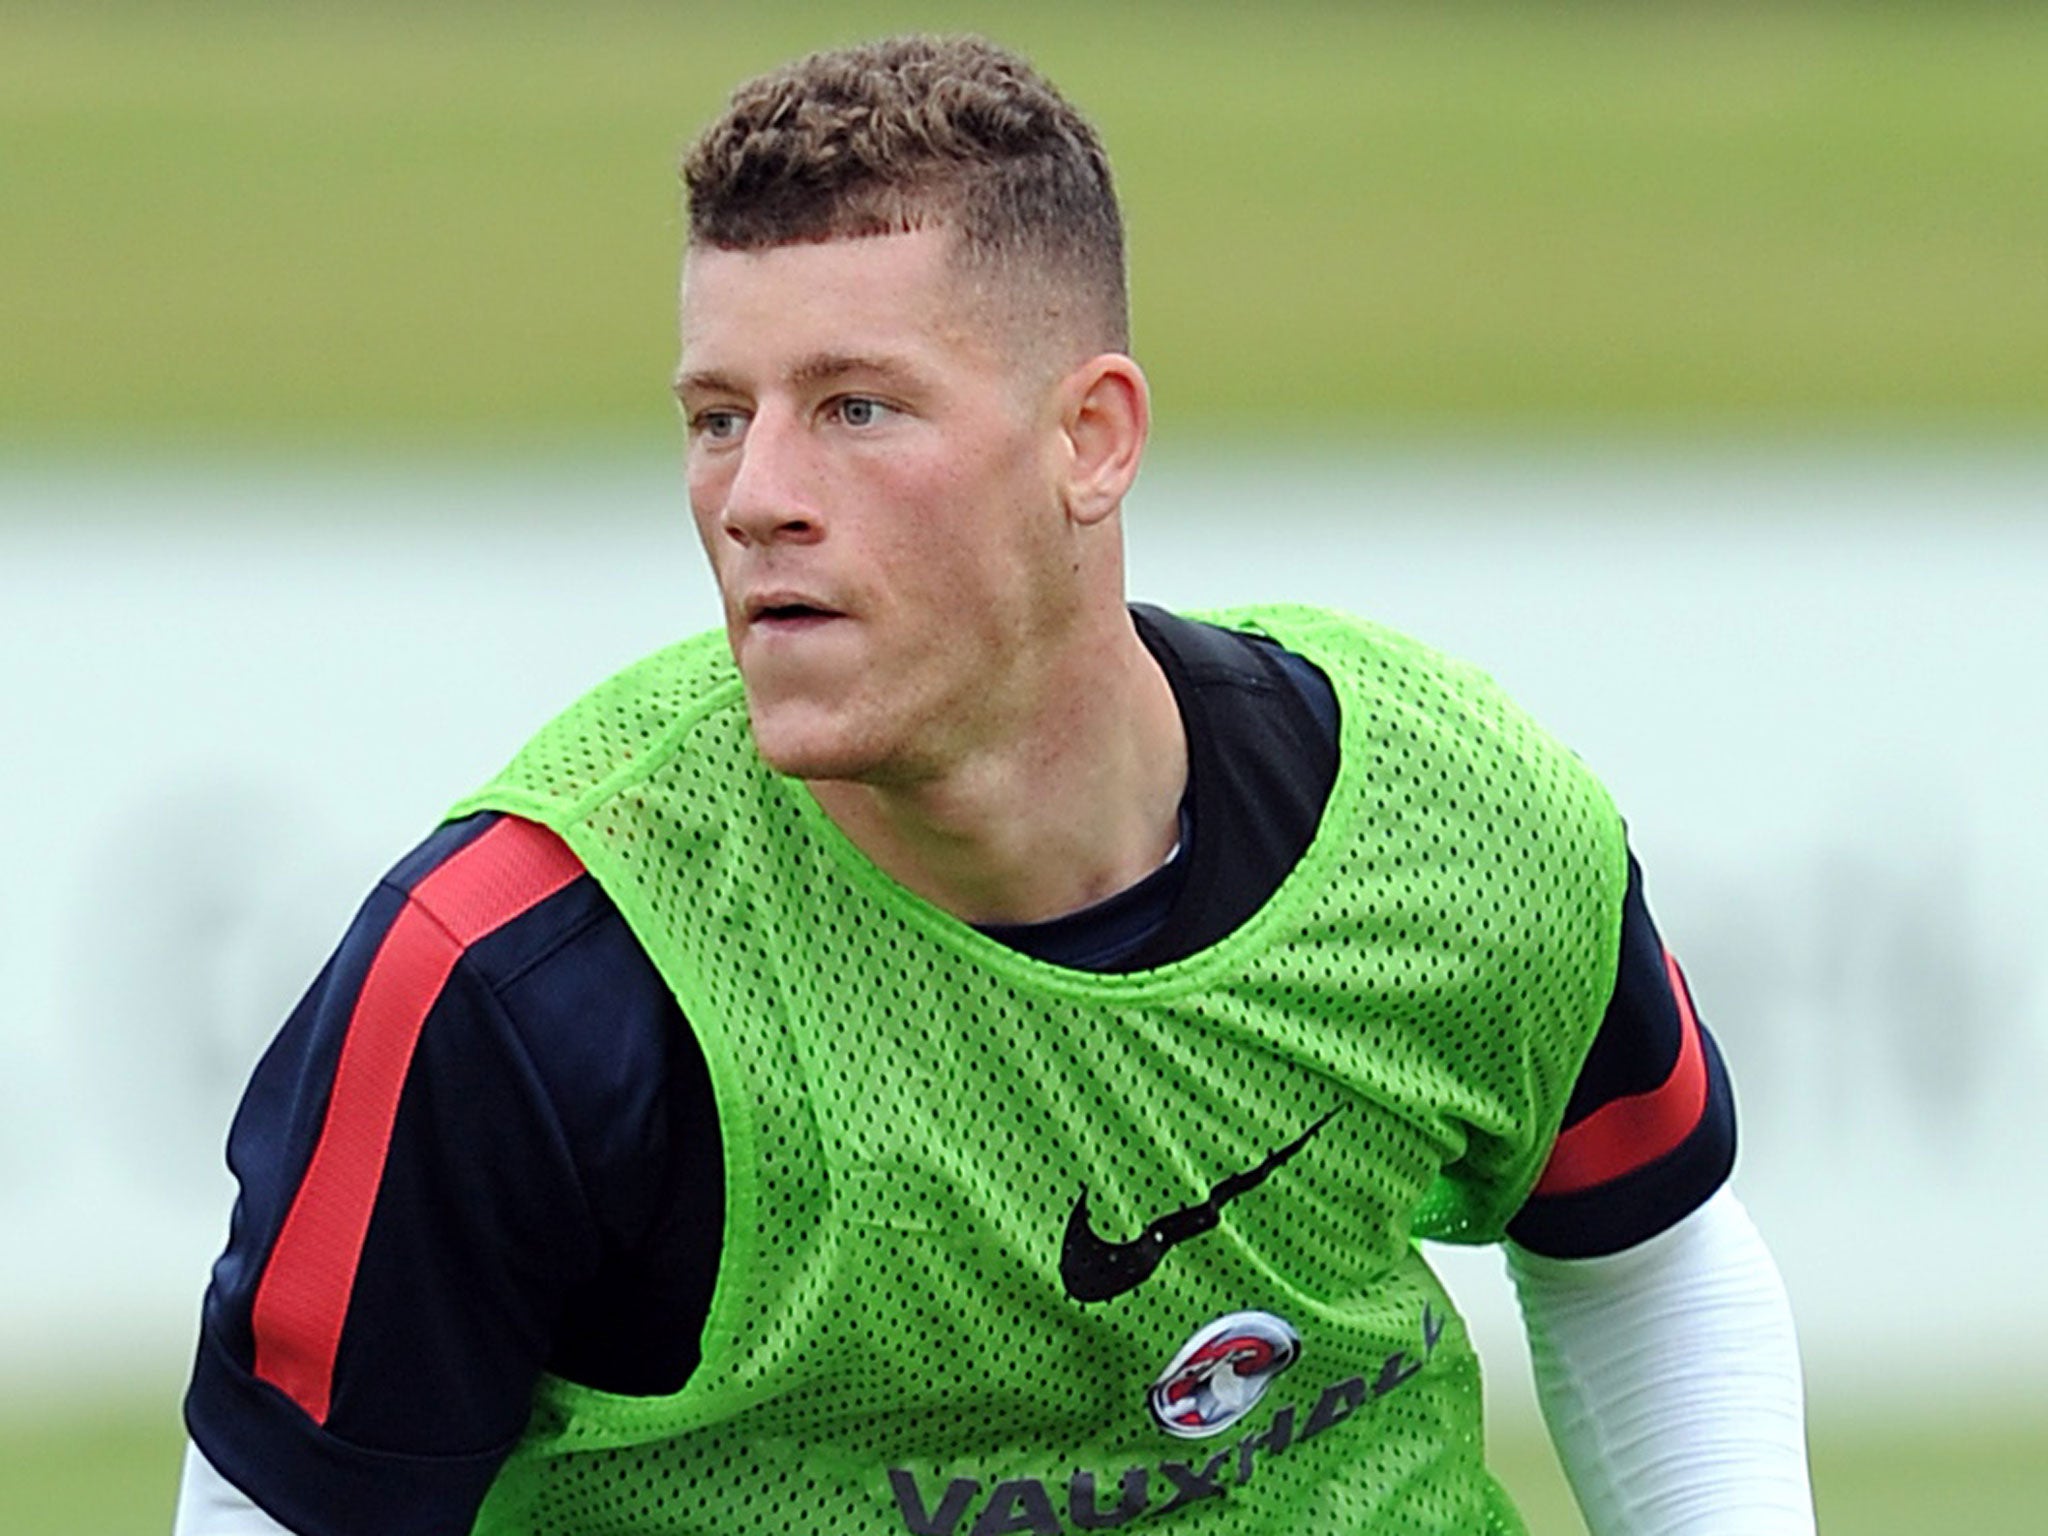 Ross Barkley: has played 18 first-team games for Everton